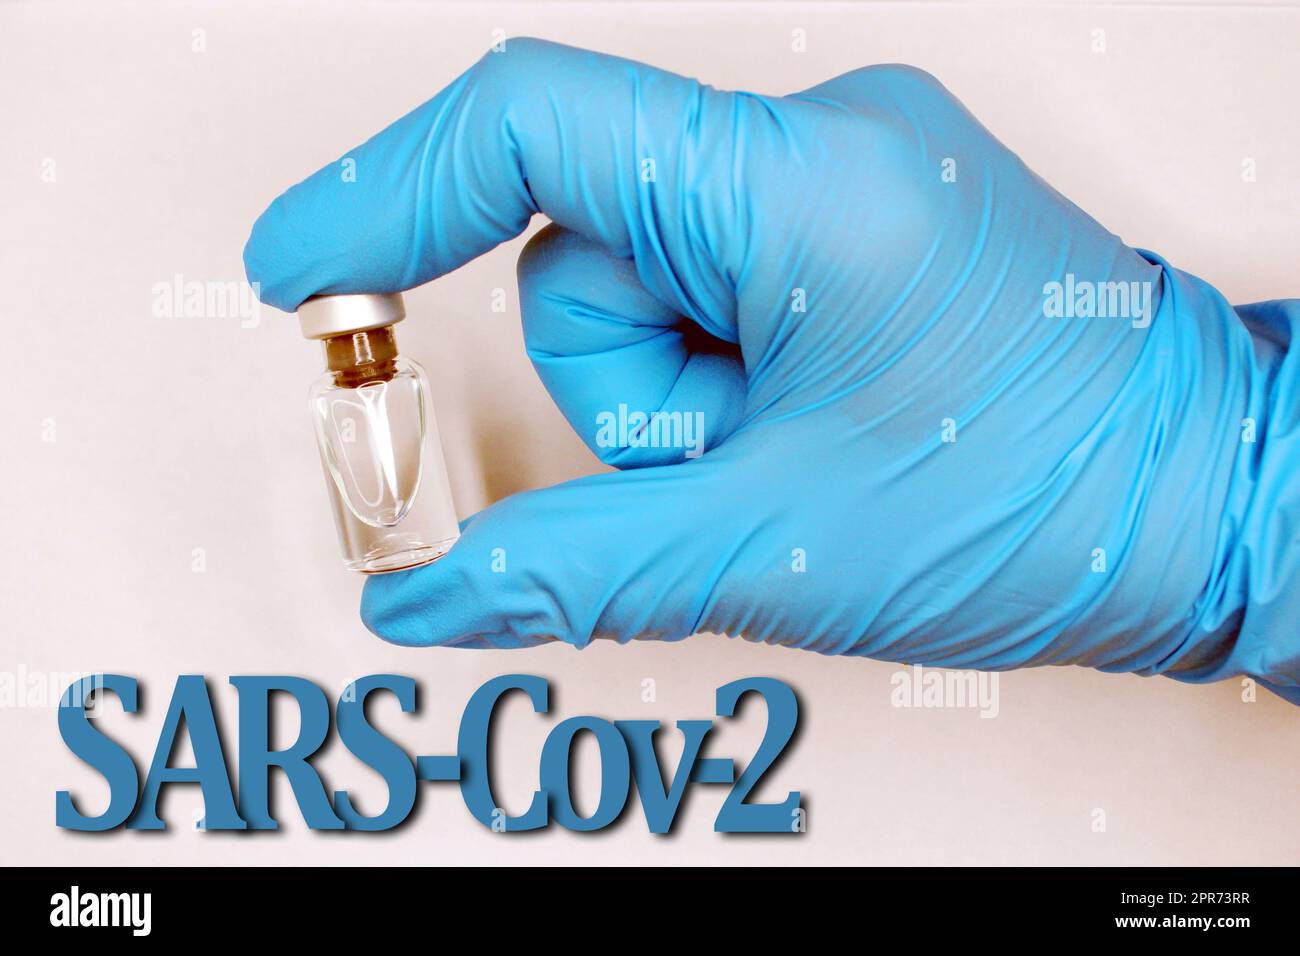 A hand in a blue medical glove close-up with a vaccine. SARS-Cov-2 inscription at the bottom. Stock Photo